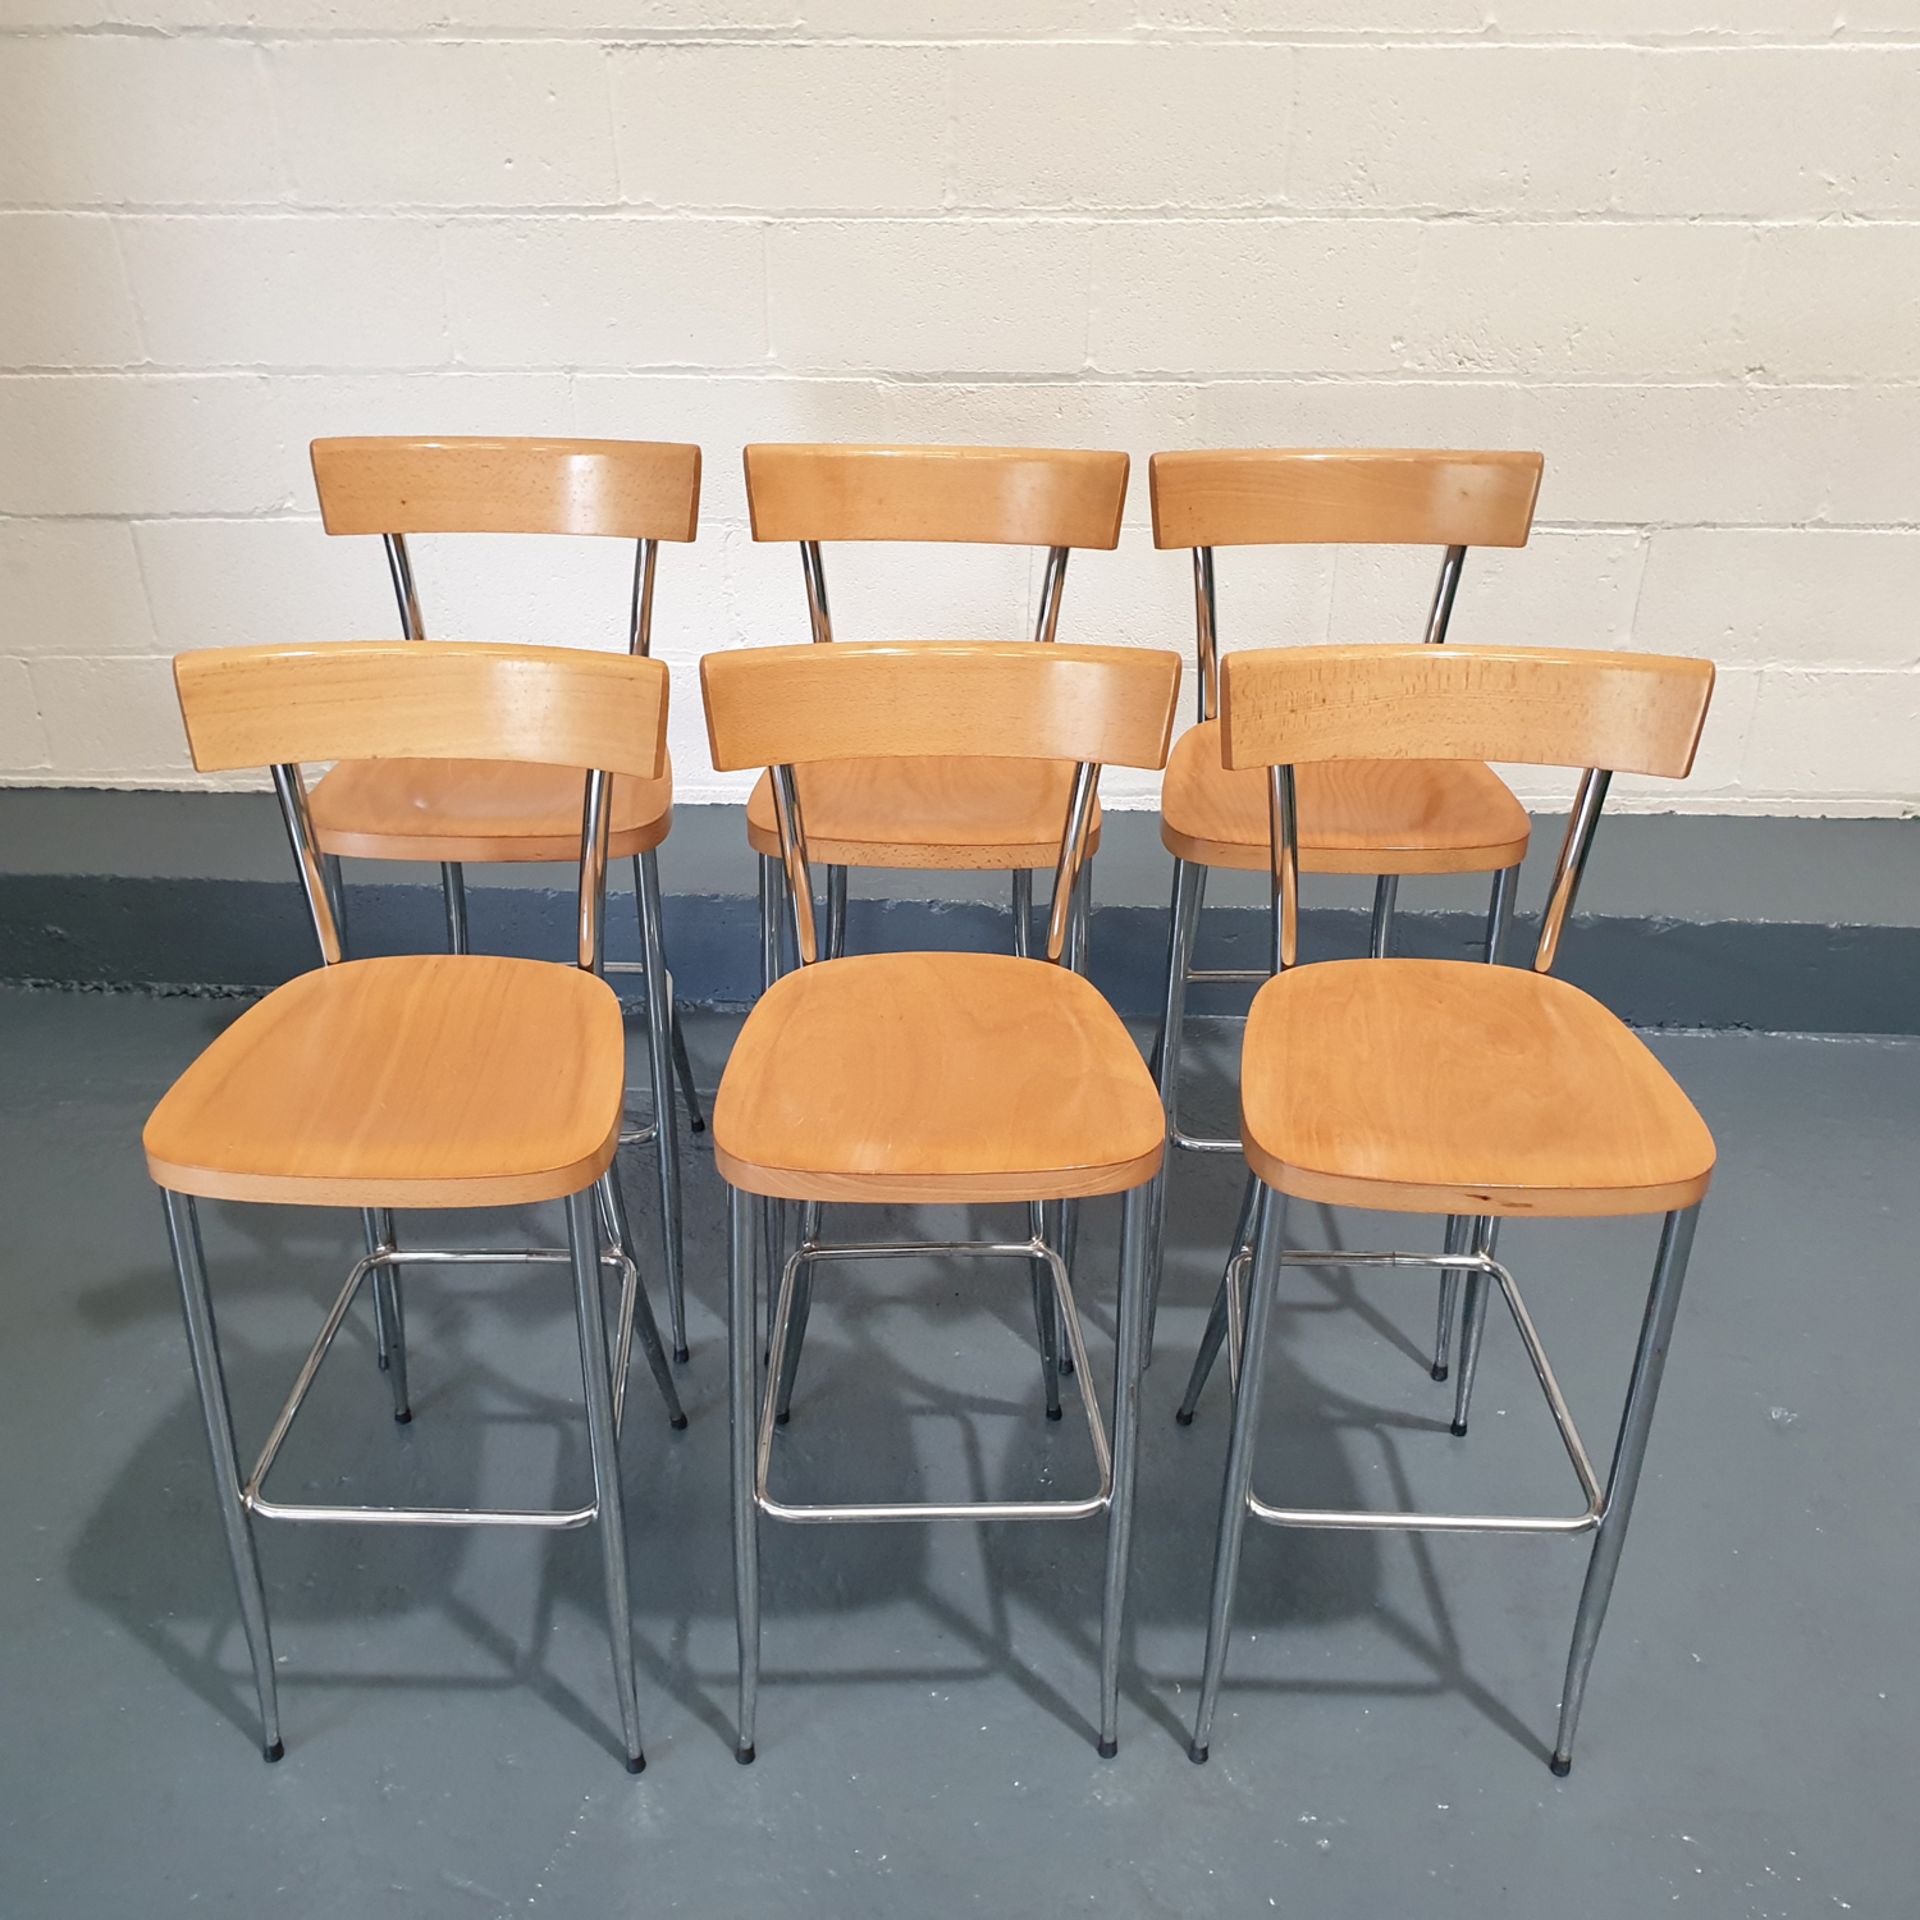 6 x Wood and Steel Bar Stools. - Image 2 of 4